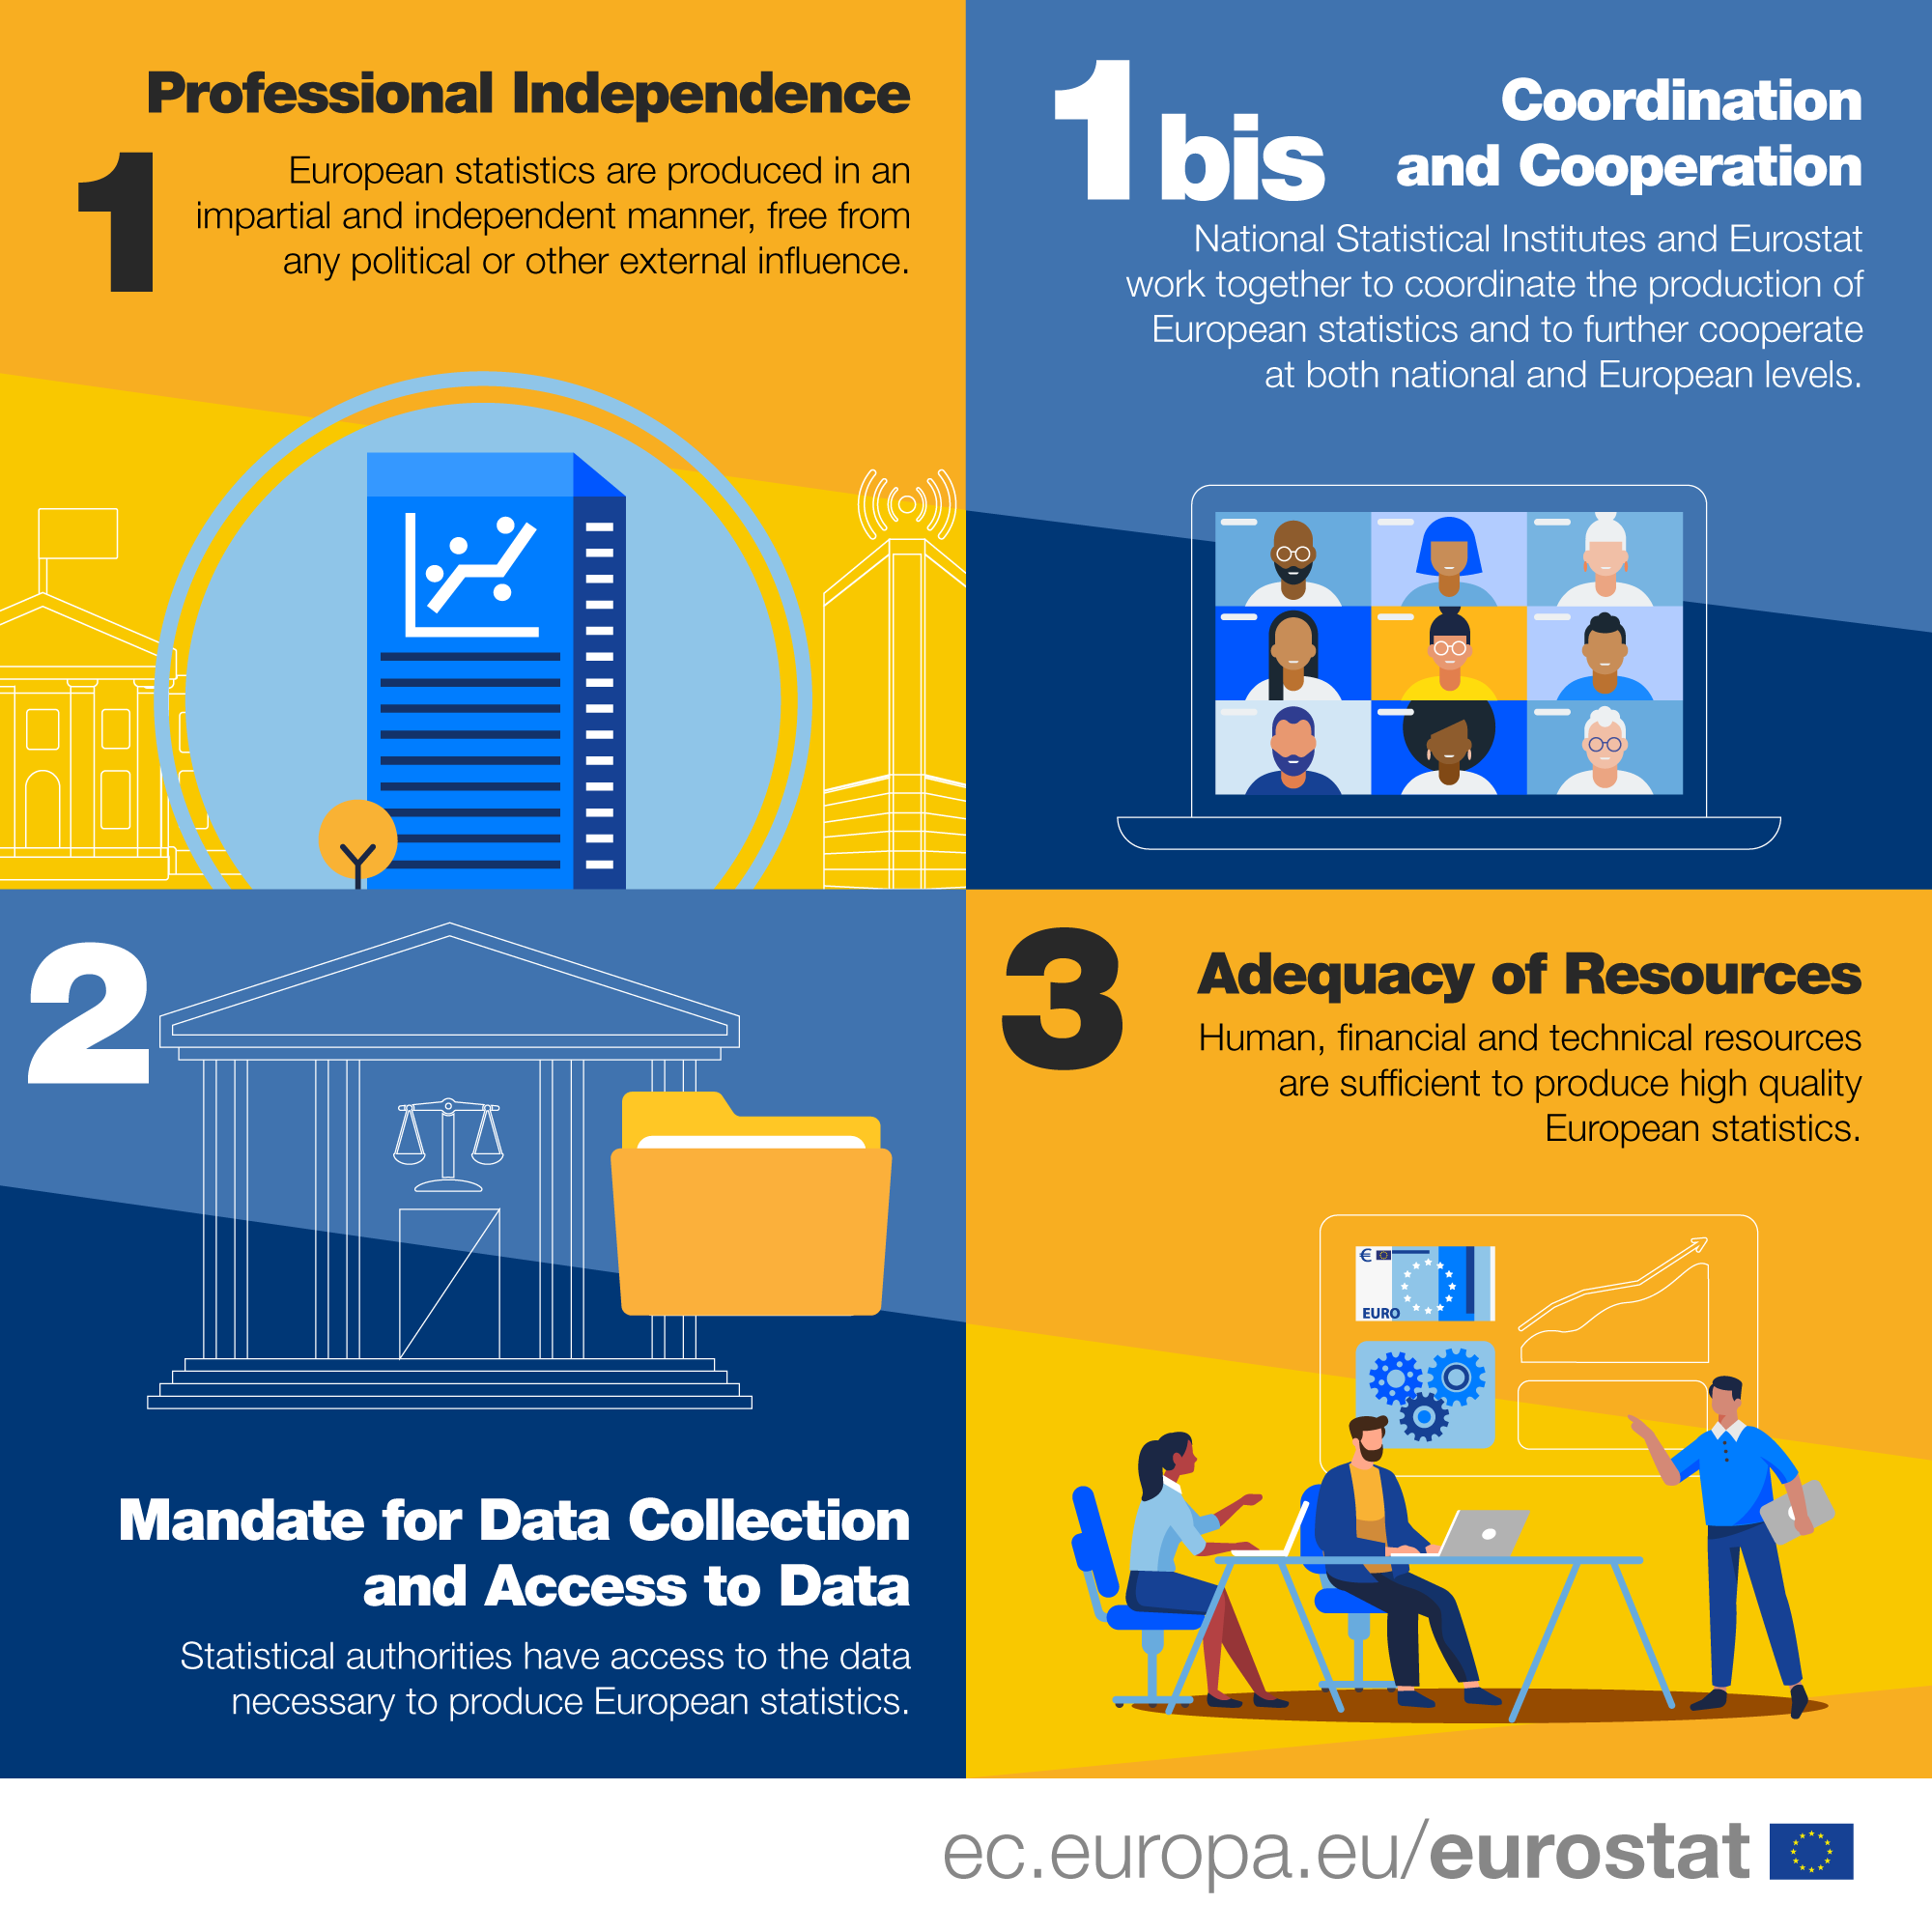 Infographic Code of Practice: 1 Professional Independence European statistics are produced in an impartial and independent manner, free from any political or other external influence. 1bis Coordination and Cooperation National Statistical Institutes and Eurostat work together to coordinate the production of European statistics and to further cooperate at both national and European levels. 2 Mandate for Data Collection and Access to Data Statistical authorities have access to the data necessary to produce European statistics. 3 Adequacy of Resources Human, financial and technical resources are sufficient to produce high quality European statistics.